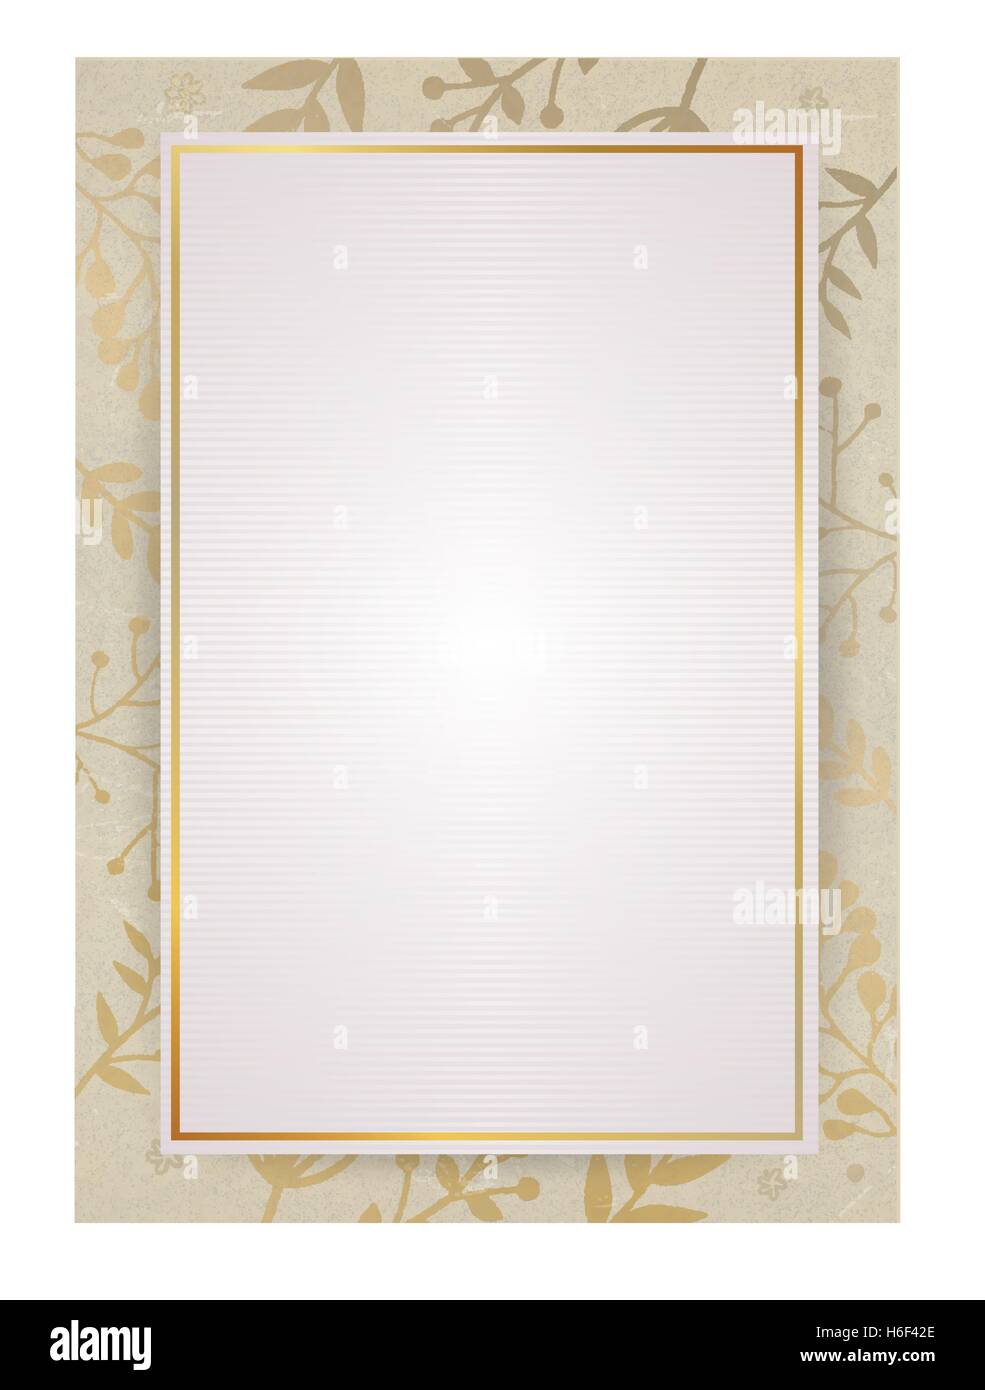 A4 Document Size White Paper Background With Golden Drawing Flora